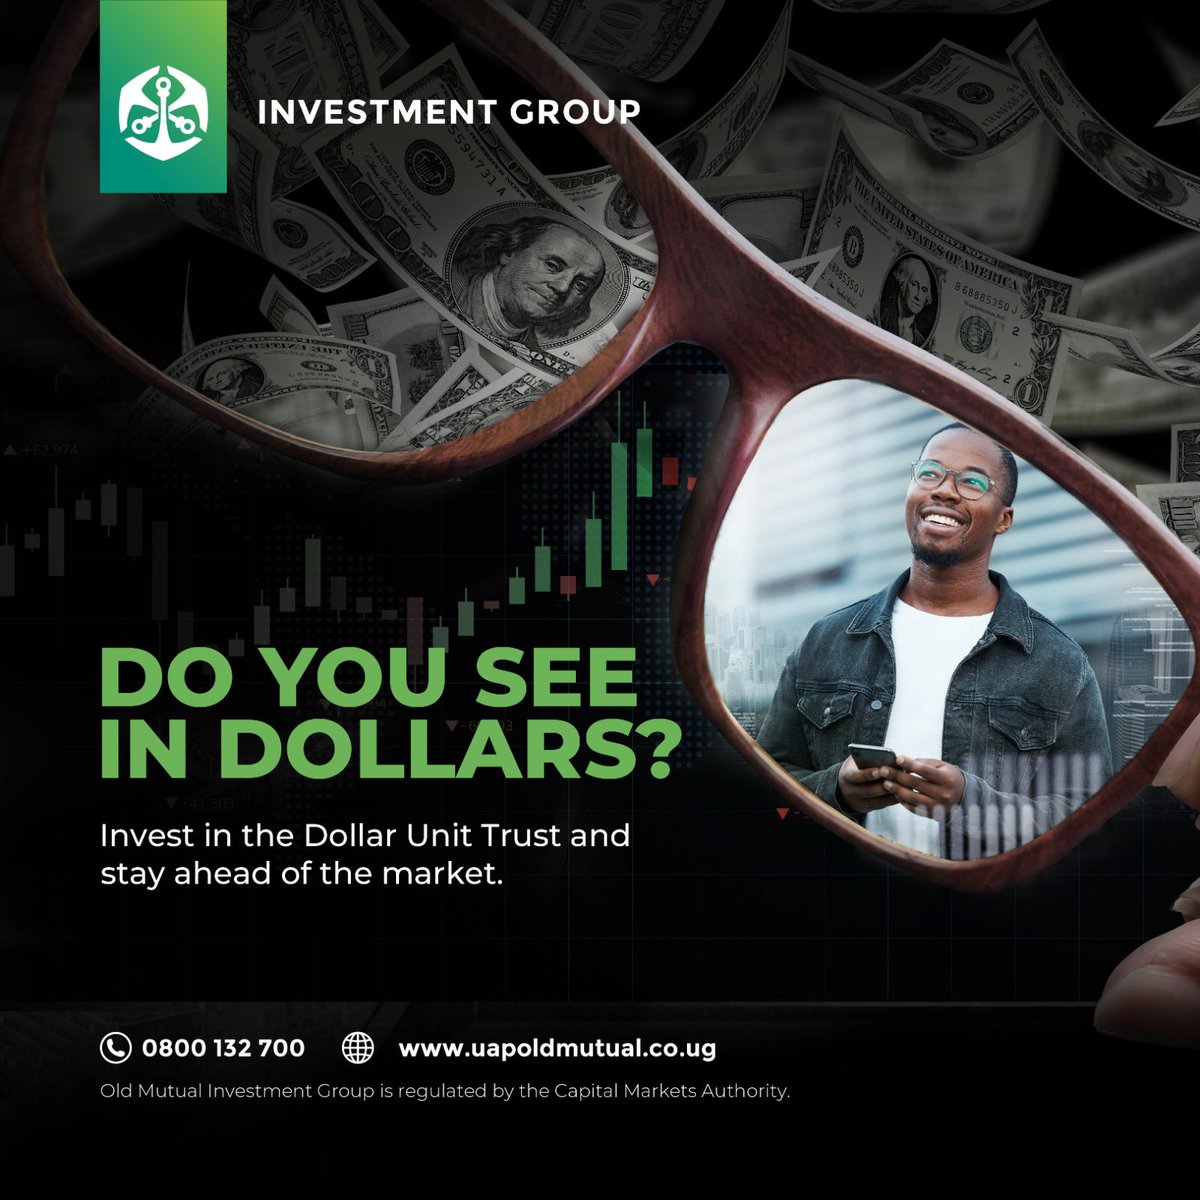 The Dollar Unit Trust Fund provides a smooth, hassle-free method to invest your dollar funds alongside a group of investors in a diverse range of financial instruments like bonds and dollar notes. #DollarUnitTrust #TutambuleFfena 
@UAPOldMutualUg